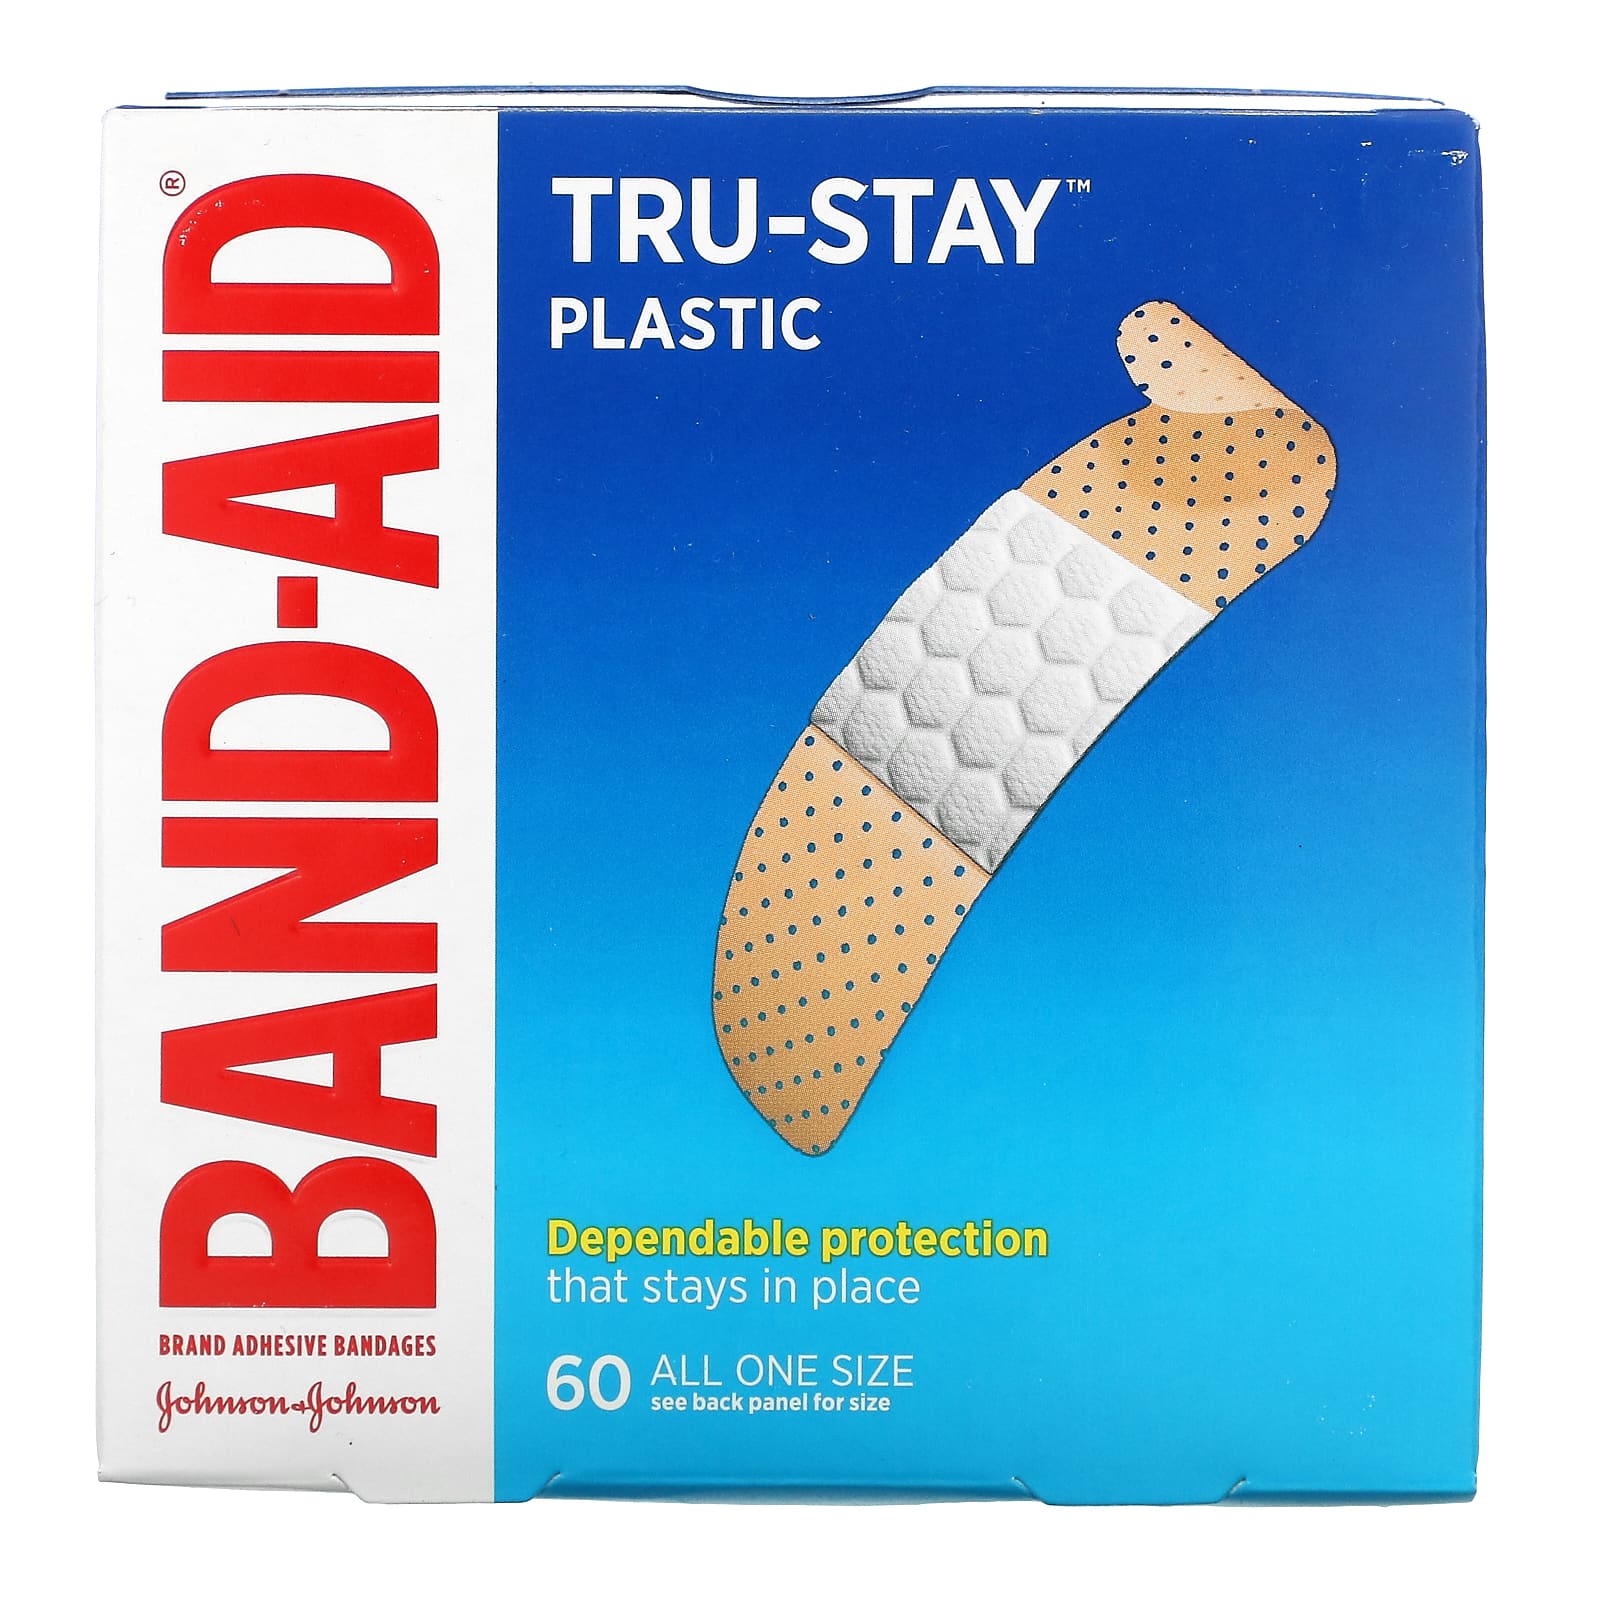 Band Aid Adhesive Bandages Plastic Strips 60 Bandages 10ml non irritating disinfecting wound hemostatic adhesive band aid natural extract gel band aid ultra thin for adult